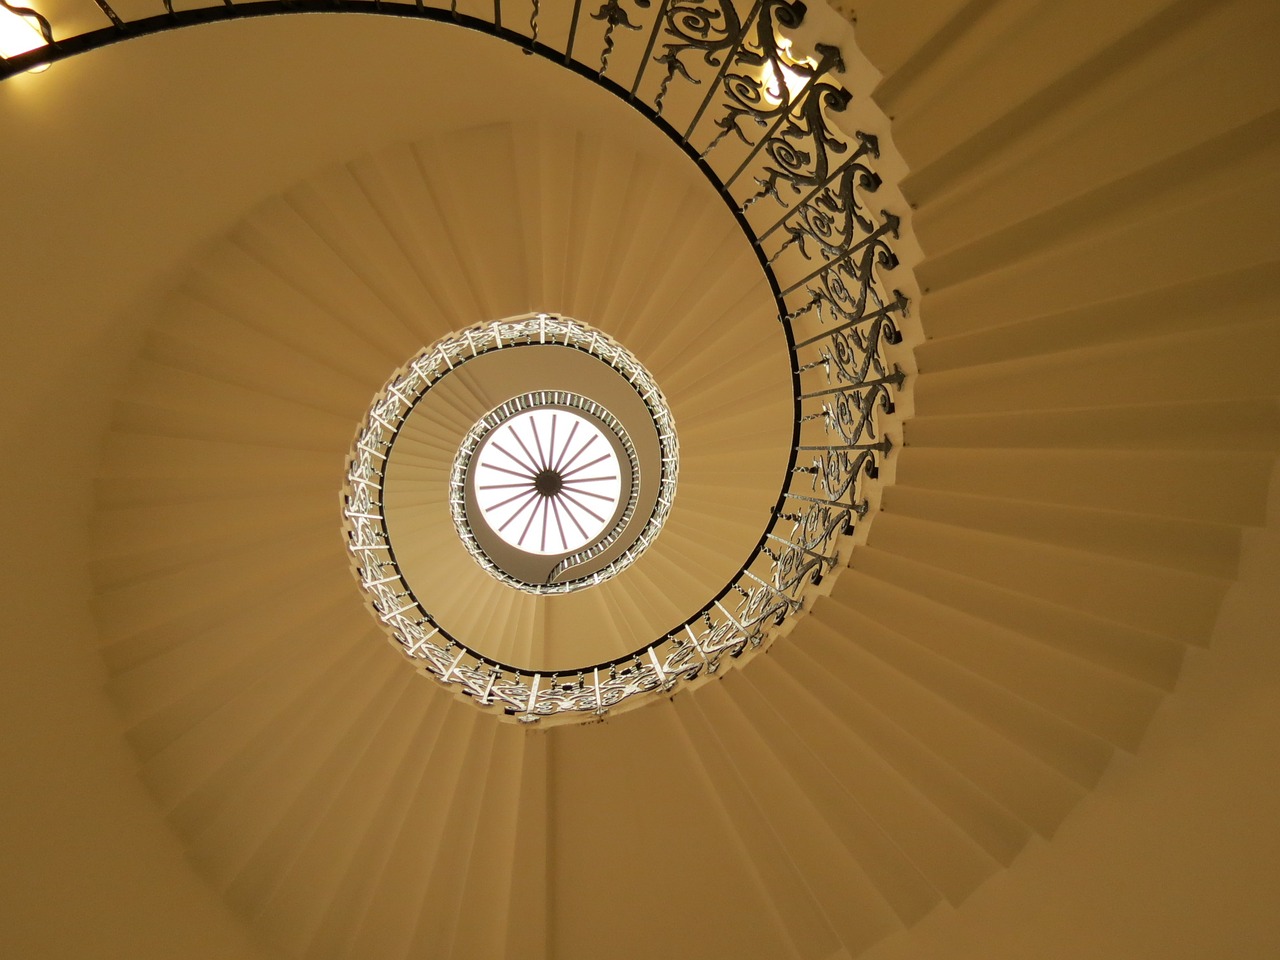 spiral staircase spiral staircase free photo